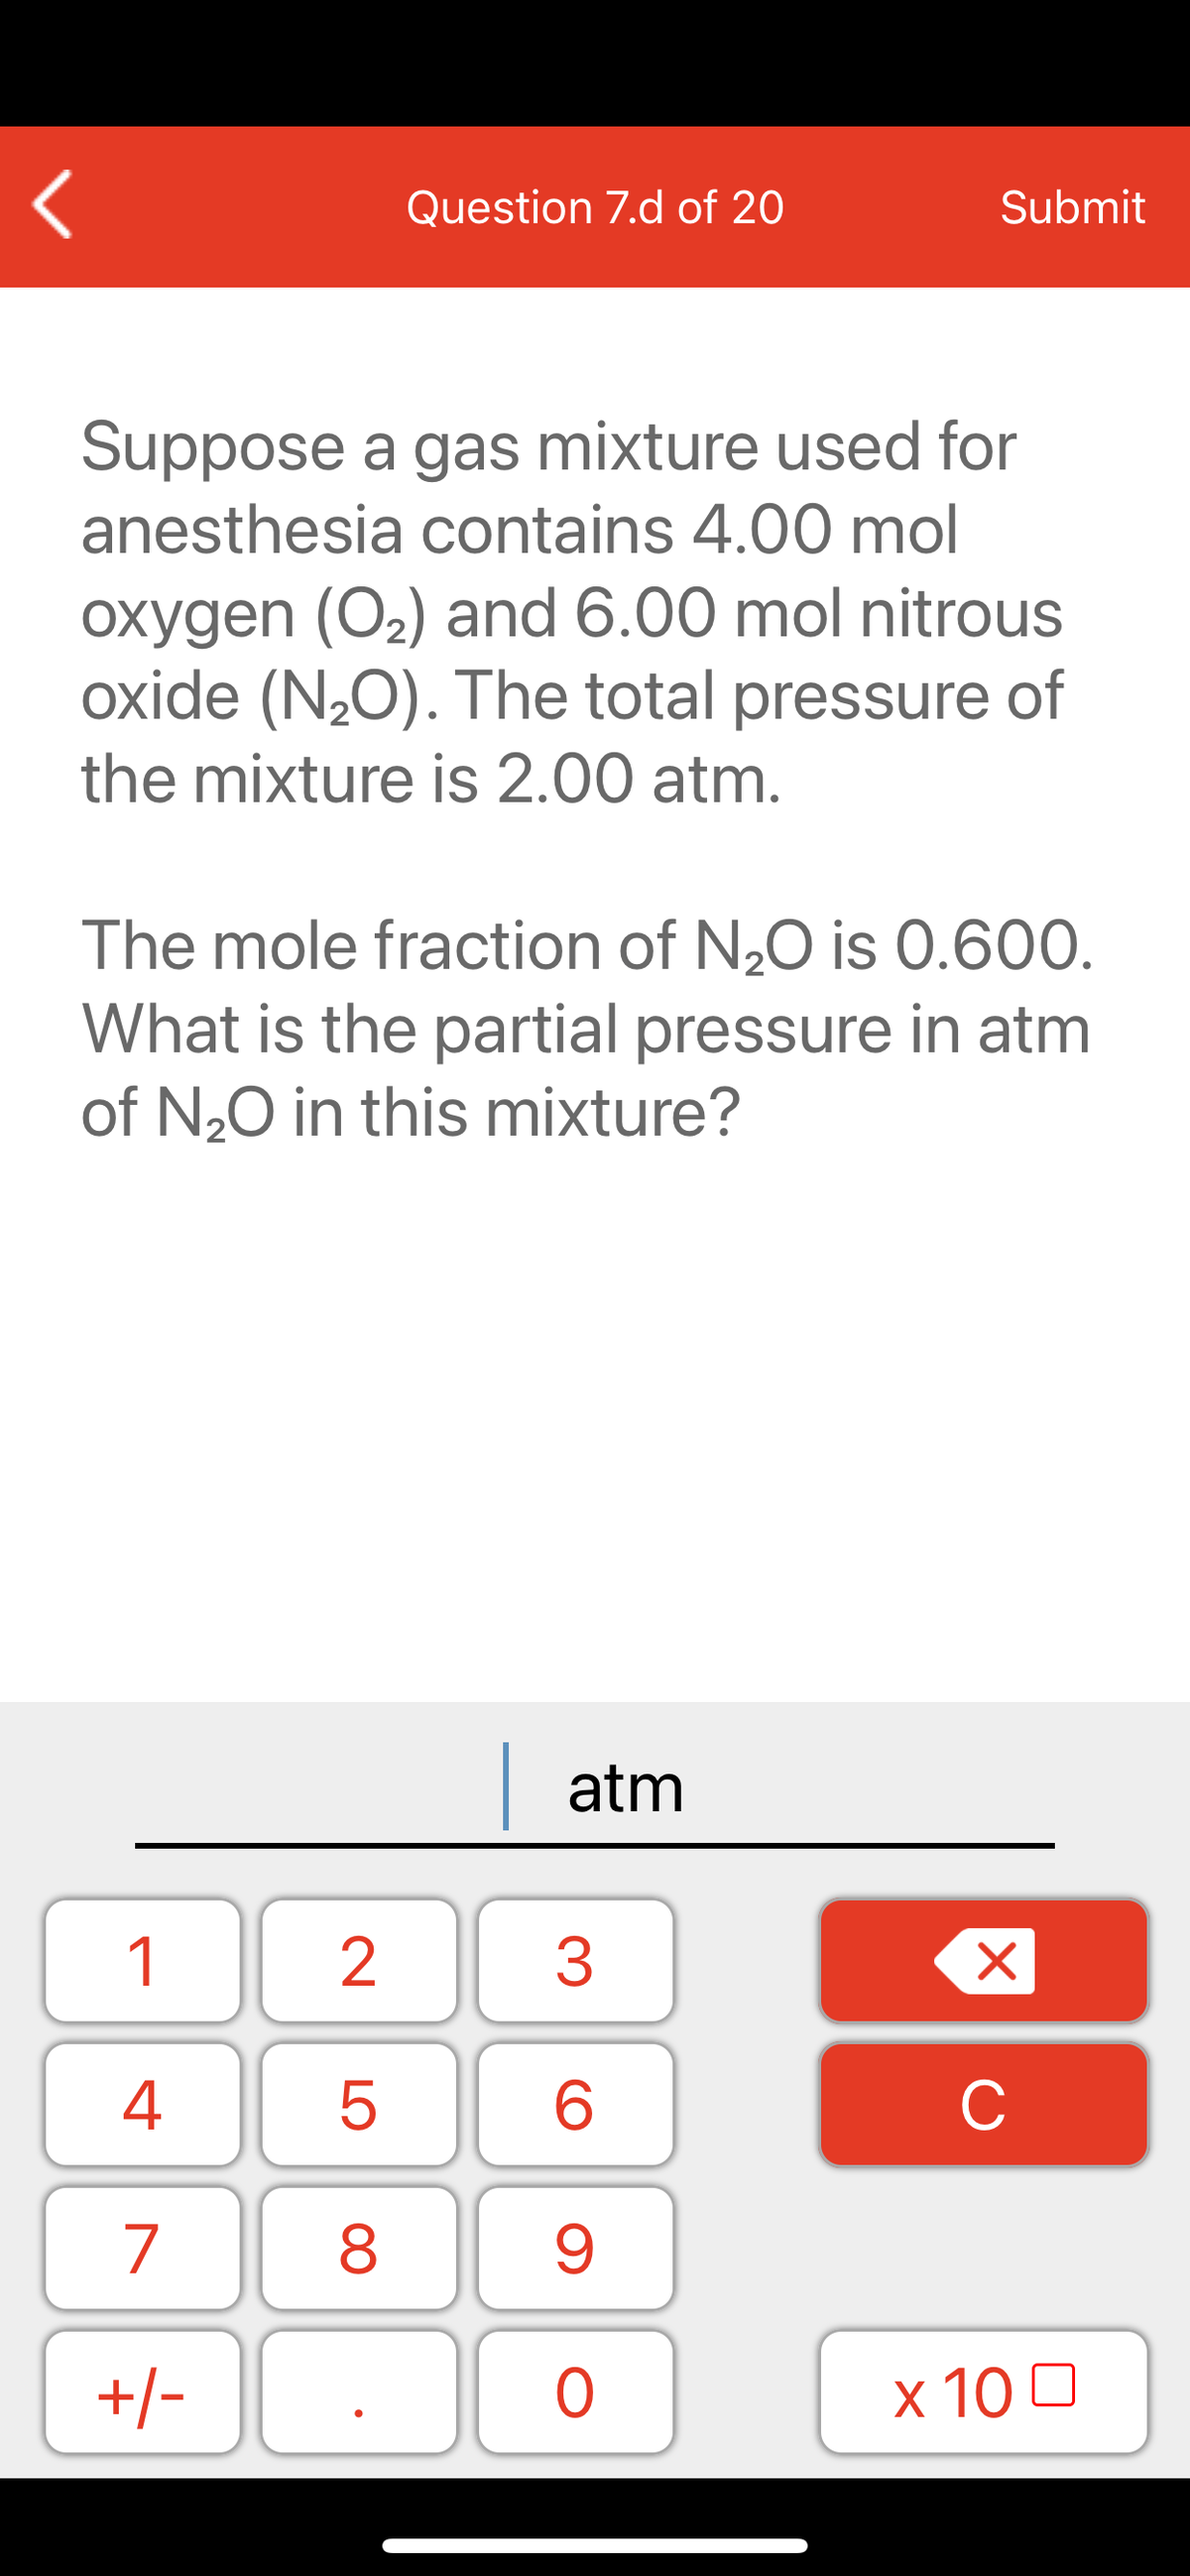 Question 7.d of 20
Submit
Suppose a gas mixture used for
anesthesia contains 4.00 mol
oxygen (O2) and 6.00 mol nitrous
oxide (N20). The total pressure of
the mixture is 2.00 atm.
The mole fraction of N20 is 0.600.
What is the partial pressure in atm
of N,0 in this mixture?
| atm
1
2
3
C
7
9.
+/-
x 10 0
LO
00
